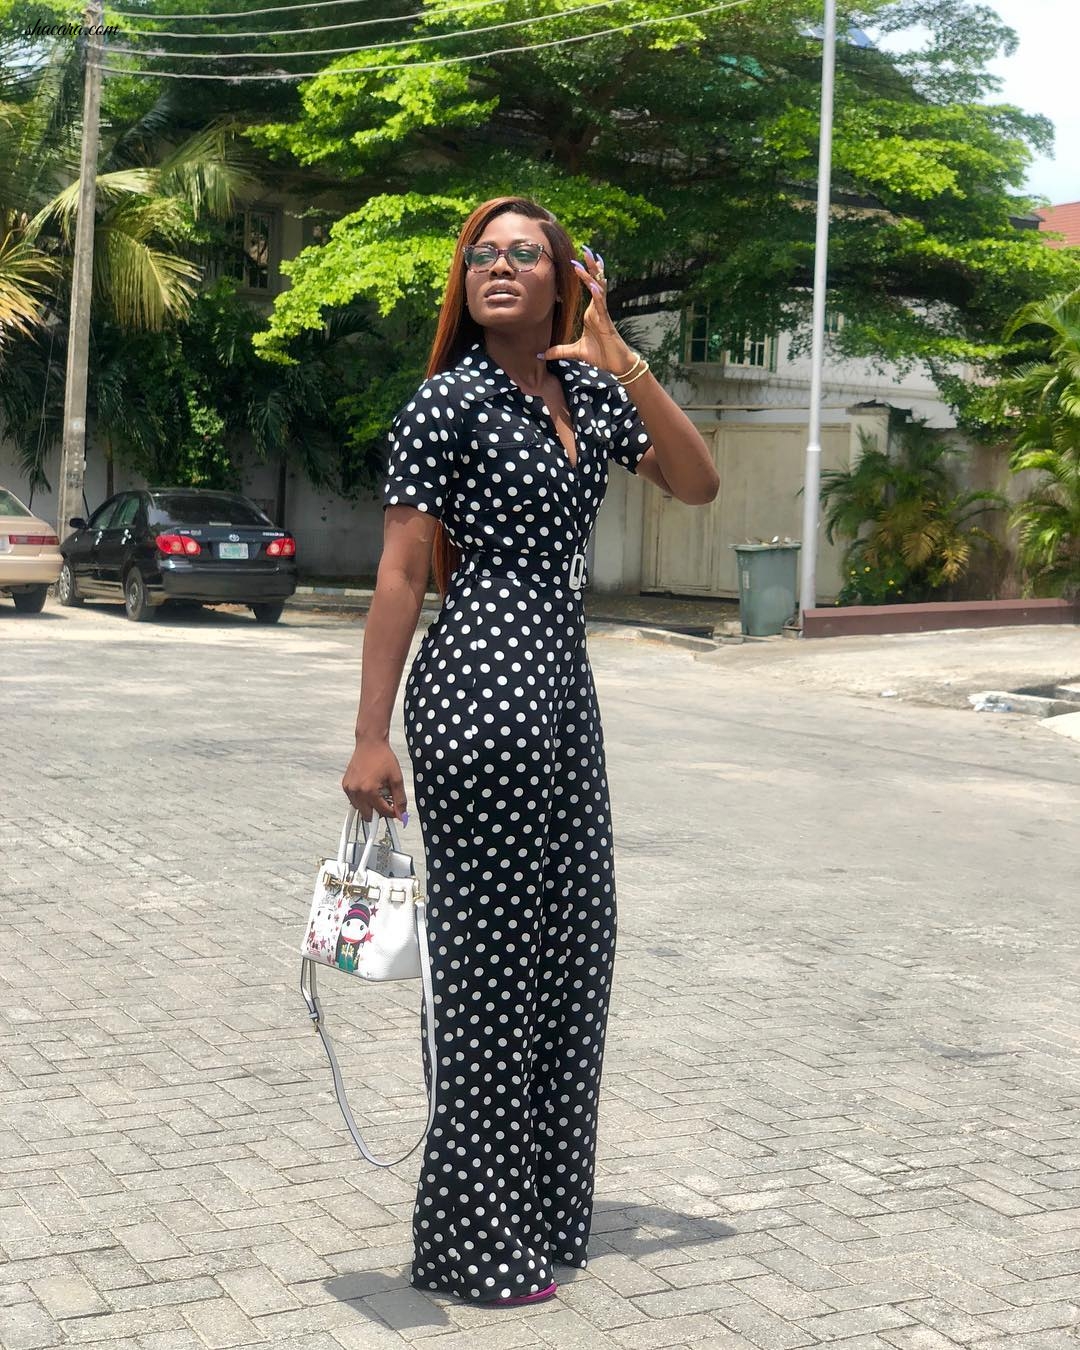 Who Wore It Better? Alex Unusual & Bambam Both Sporting The Polka Dot Trend